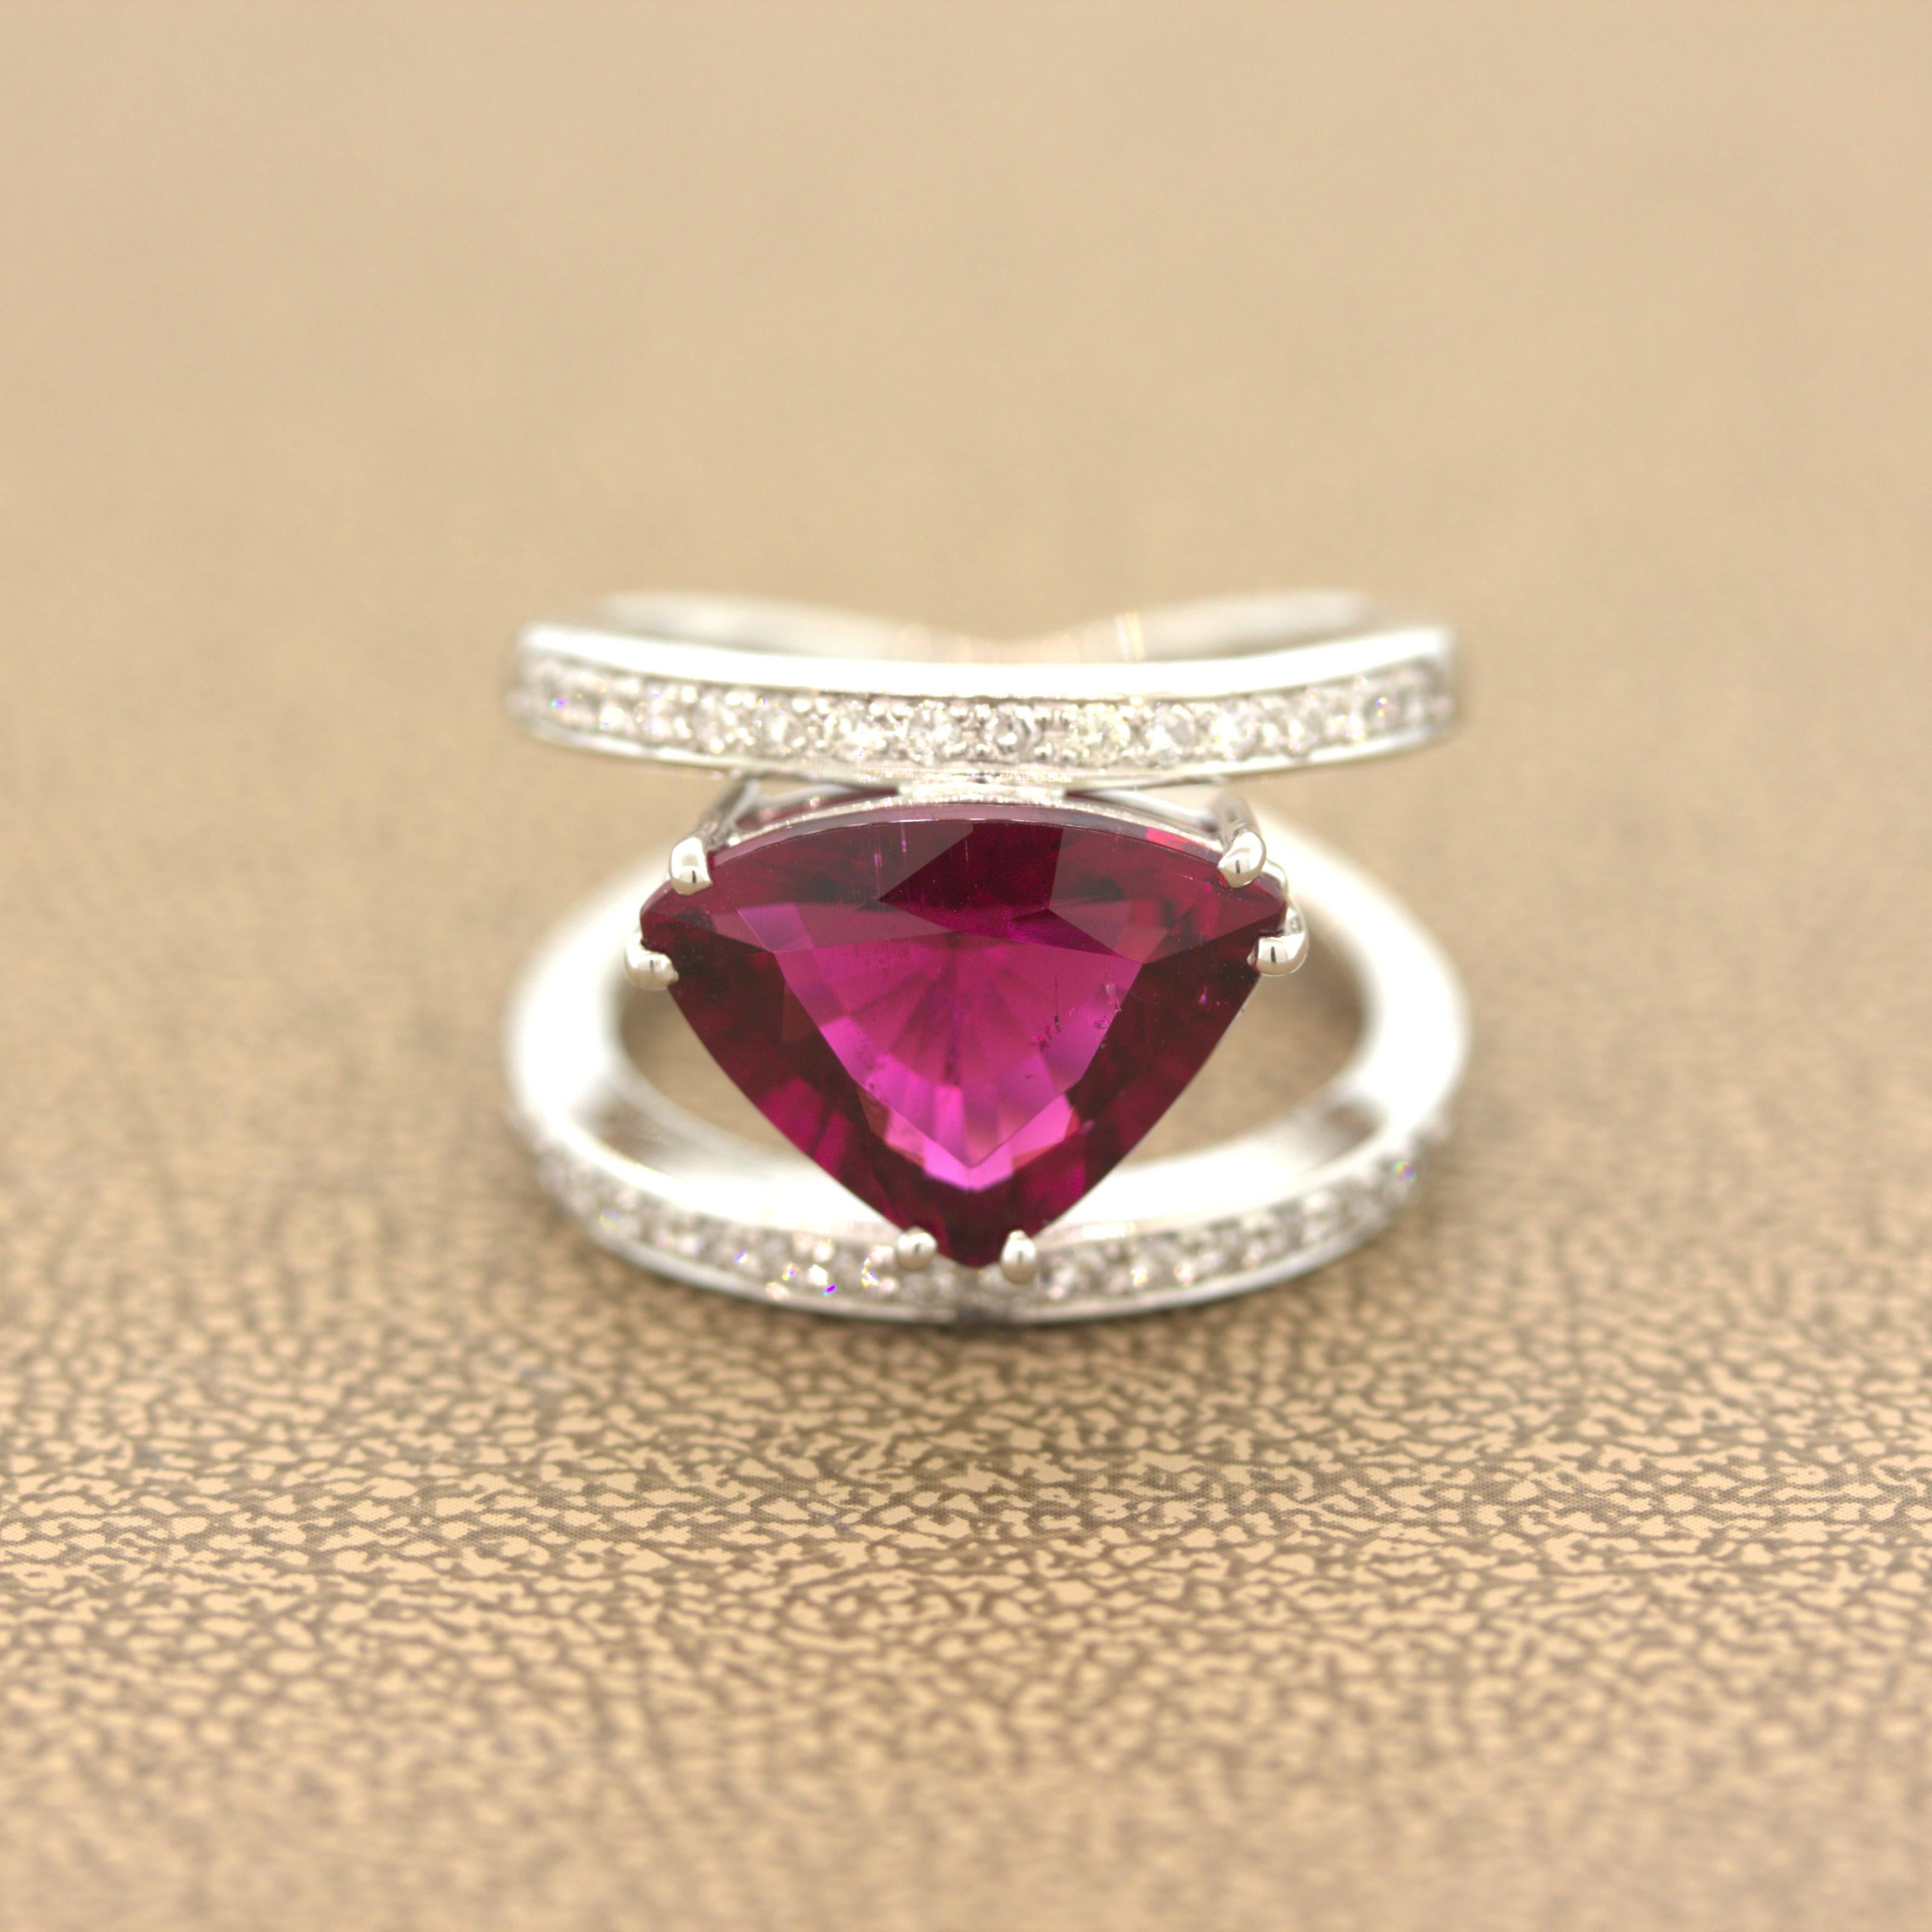 A rich beautiful gem takes center stage! It is a 5.30 carat rubellite tourmaline with a deep and brilliant red color that rivals the best rubies on the market. Complementing the fine tourmaline are 0.38 carats of round brilliant-cut diamonds adding